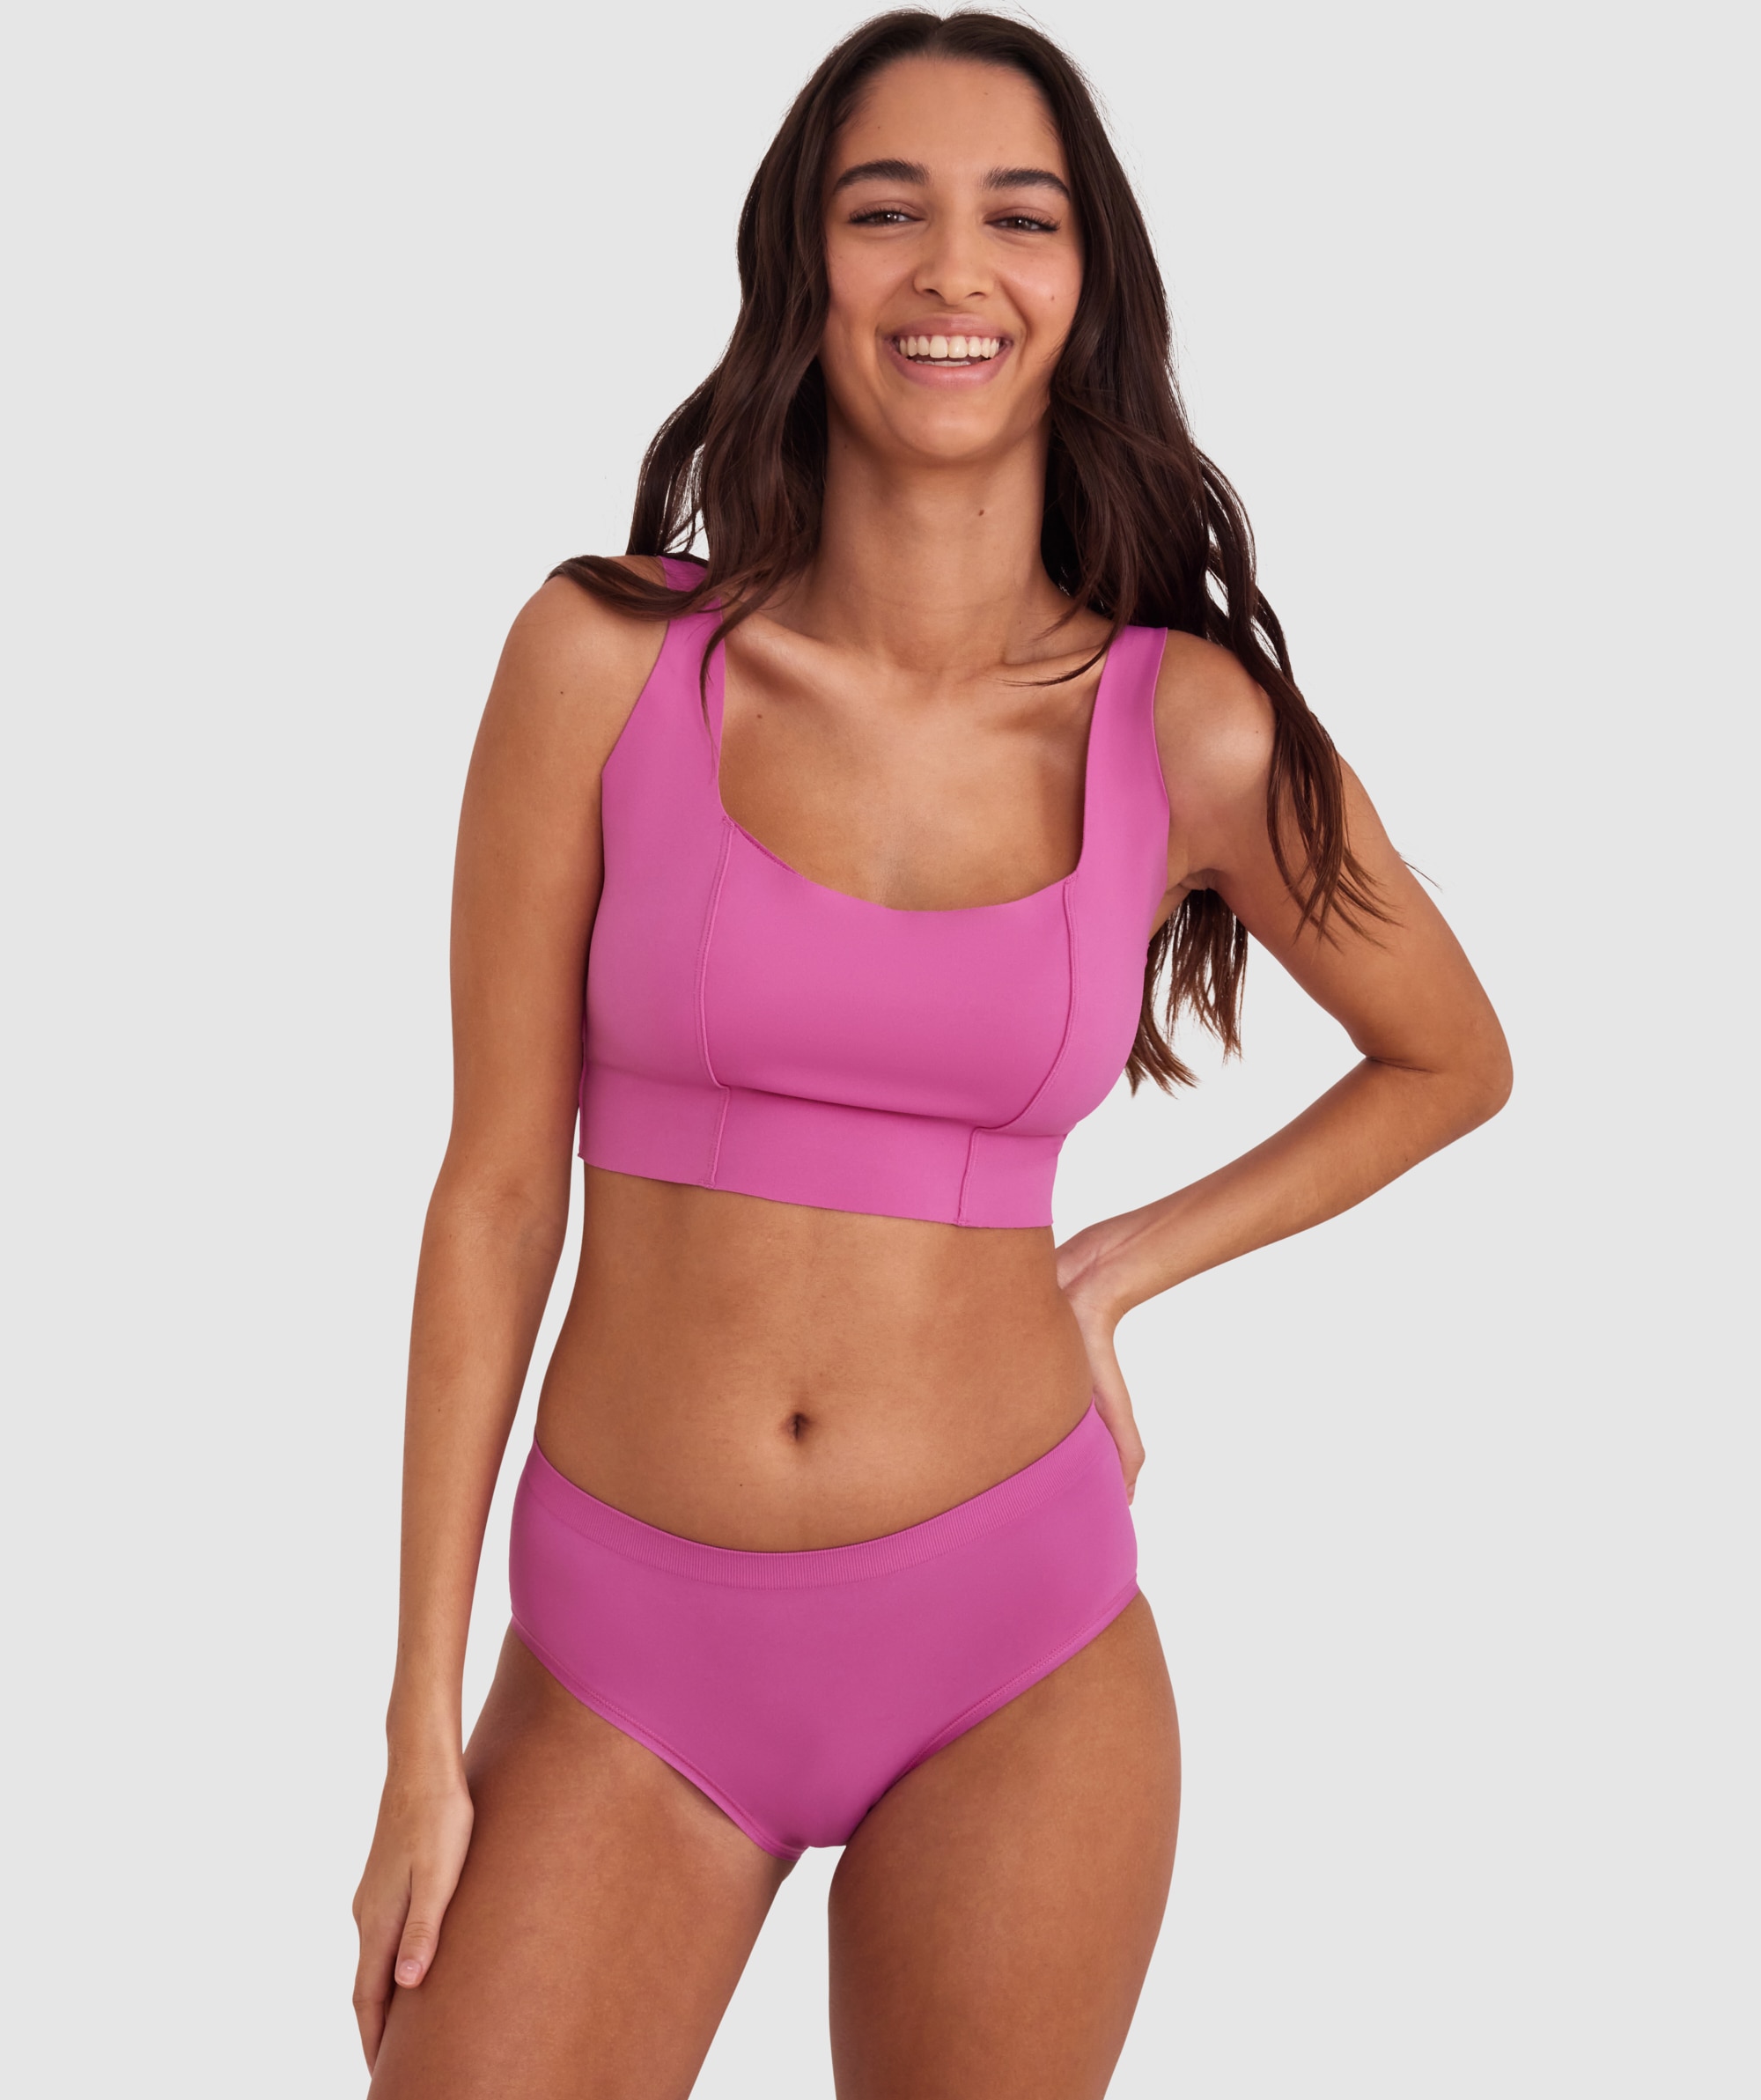 Base Layers Hipster Brief - Pink